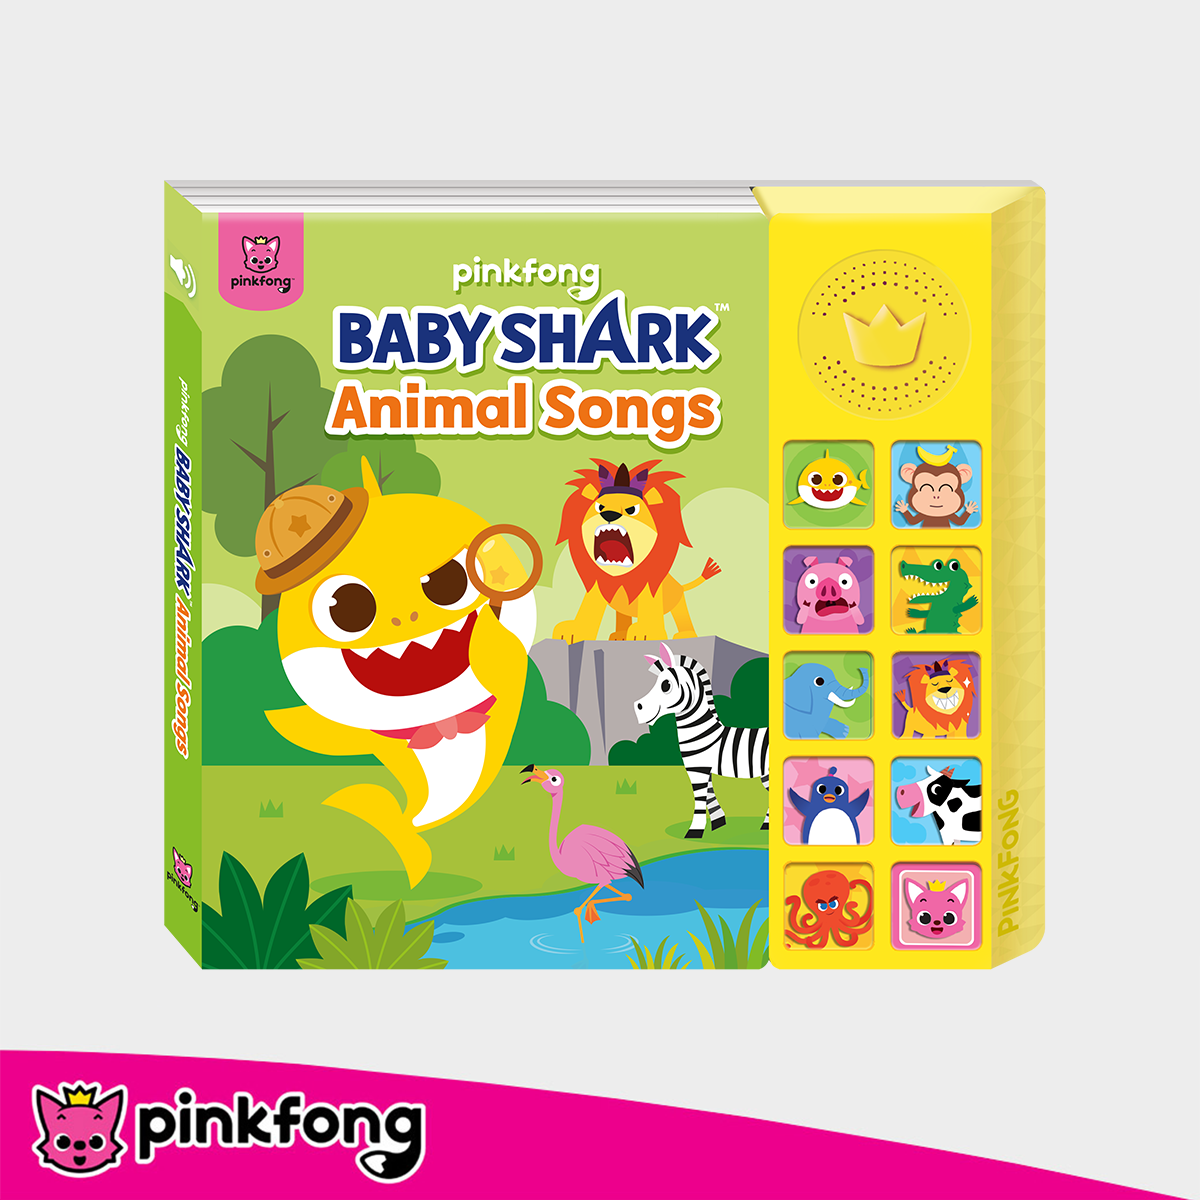 Baby Shark Animal Songs Sound Book | Pinkfong - babystorythailand